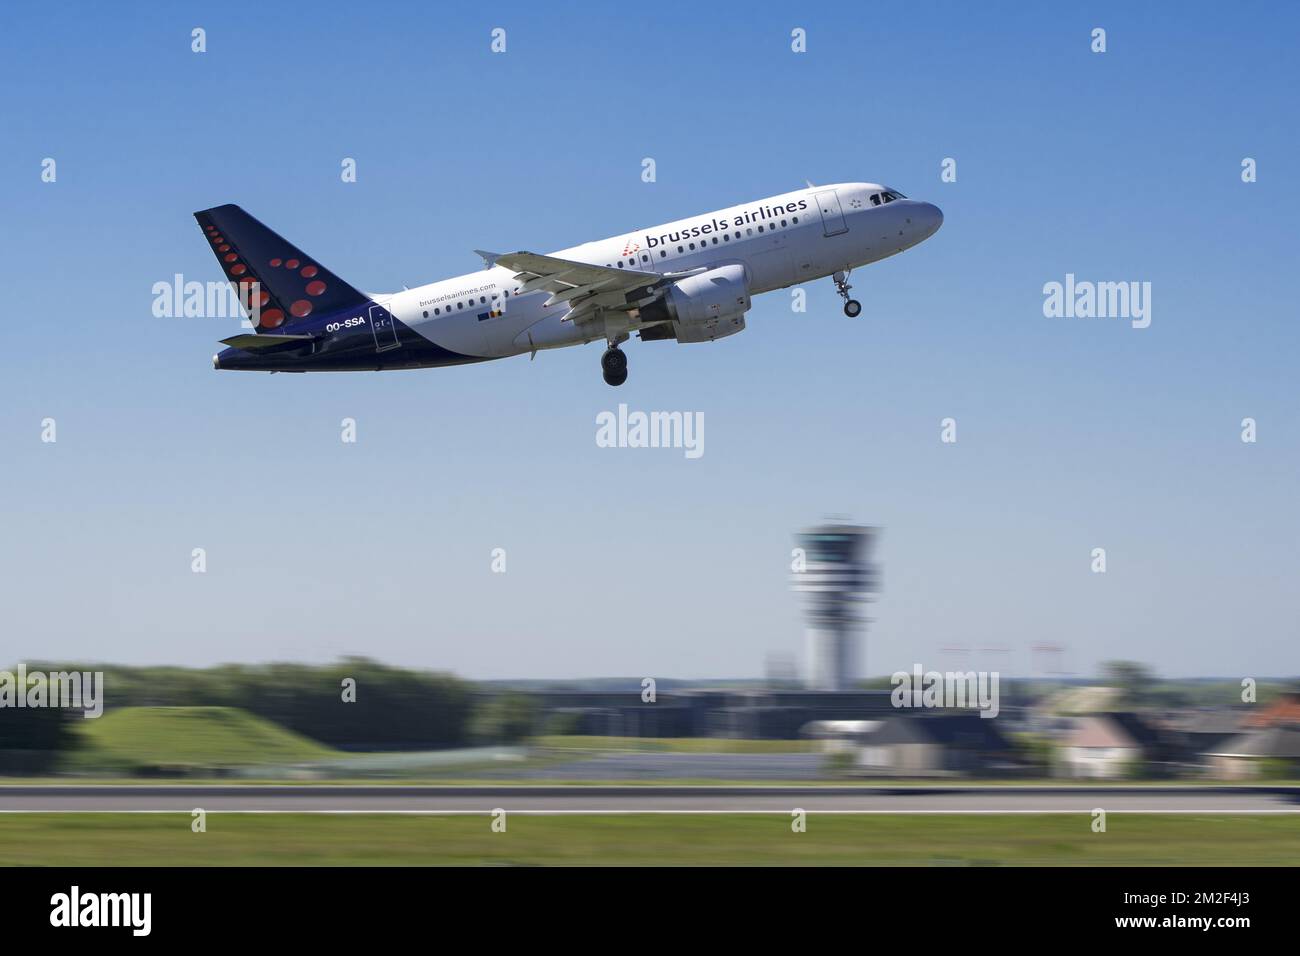 Airbus A319-111 from Brussels Airlines taking off from runway at the Brussels-National airport, Zaventem, Belgium | Airbus A319-111 de Brussels Airlines à l'aéroport de Bruxelles-National, Zaventem, Belgique 06/05/2018 Stock Photo